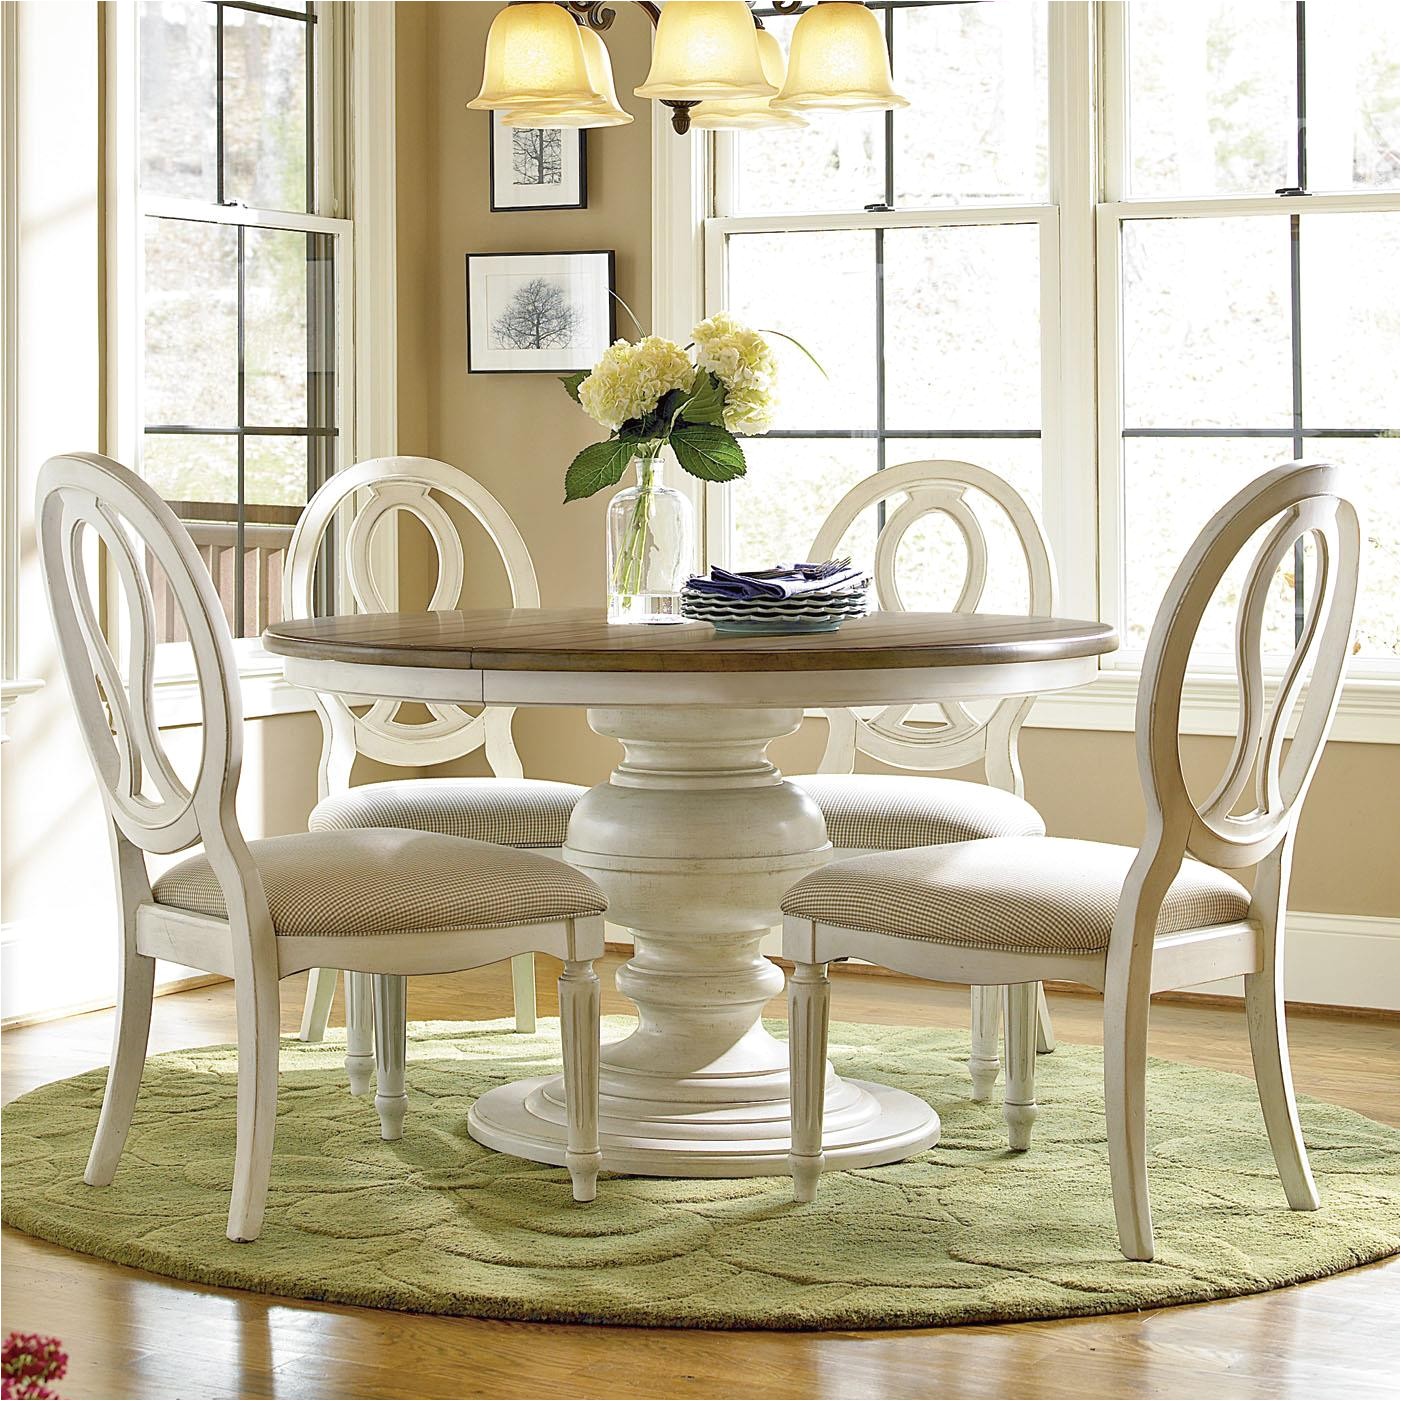 Baers Dining Room Sets Universal Summer Hill 5 Piece Dining Set with Pierced Back